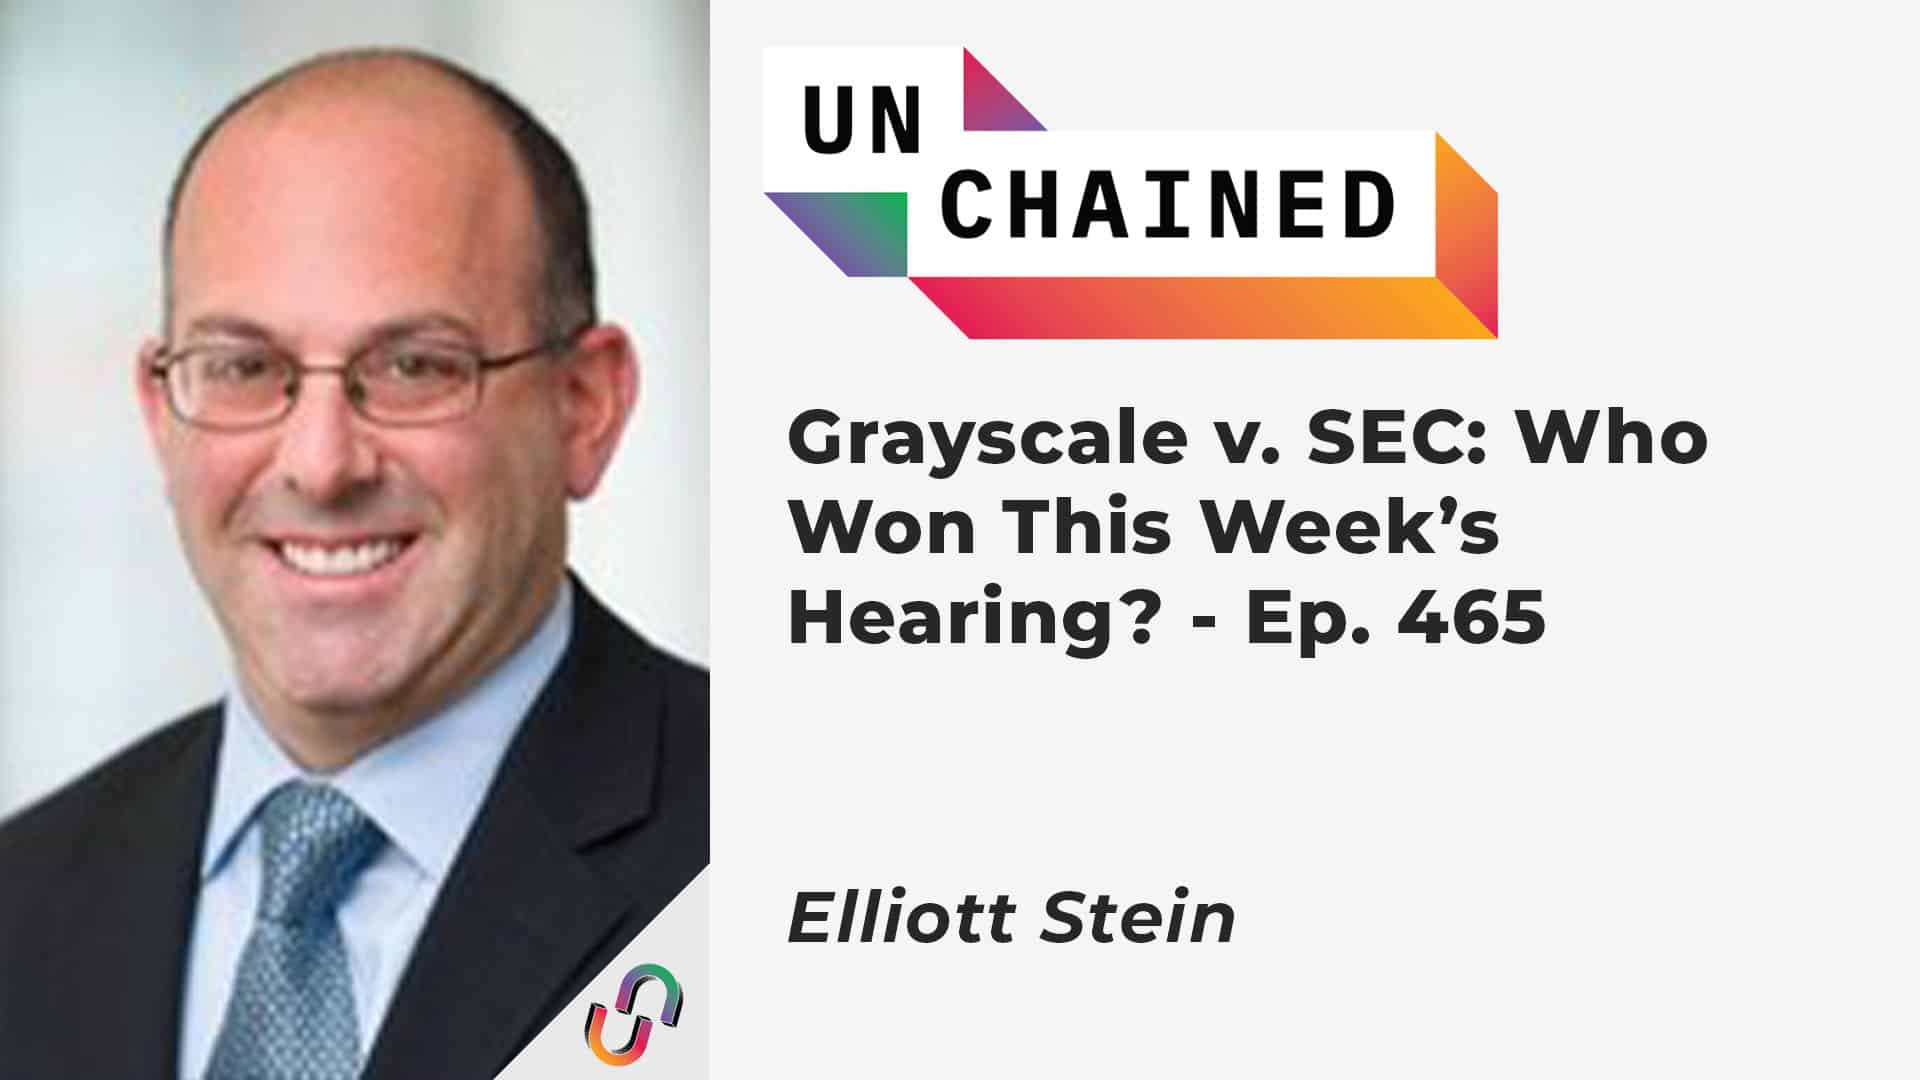 Grayscale v. SEC: Who Won This Week’s Hearing? - Ep. 465